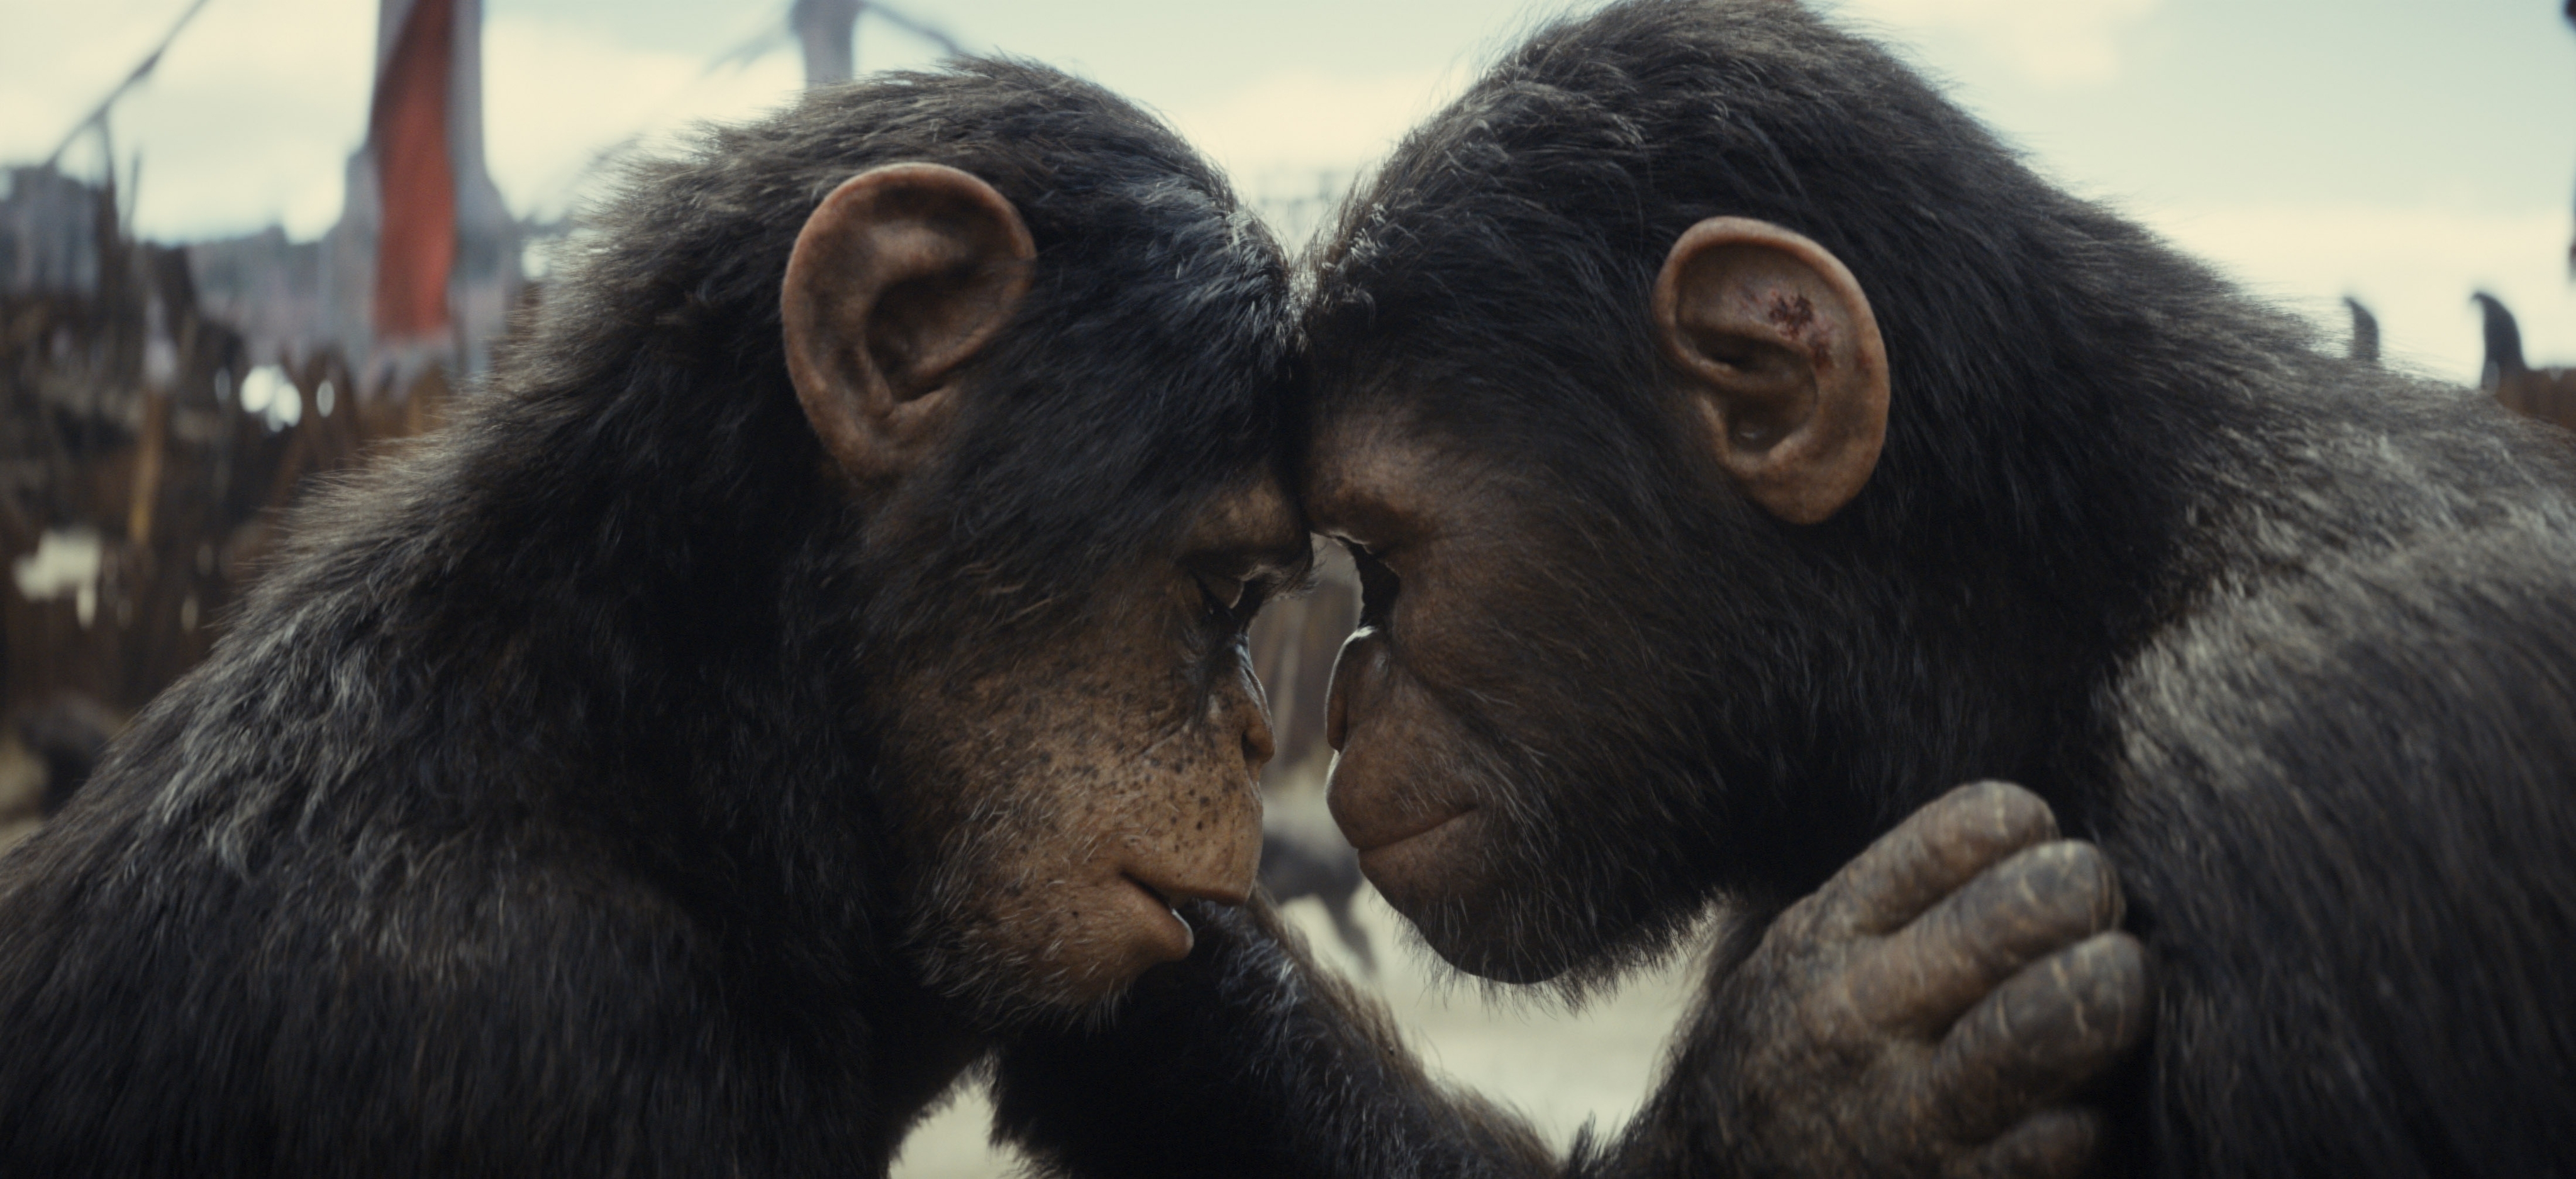 ‘Kingdom of the Planet of the Apes’ Dominates The Box Office